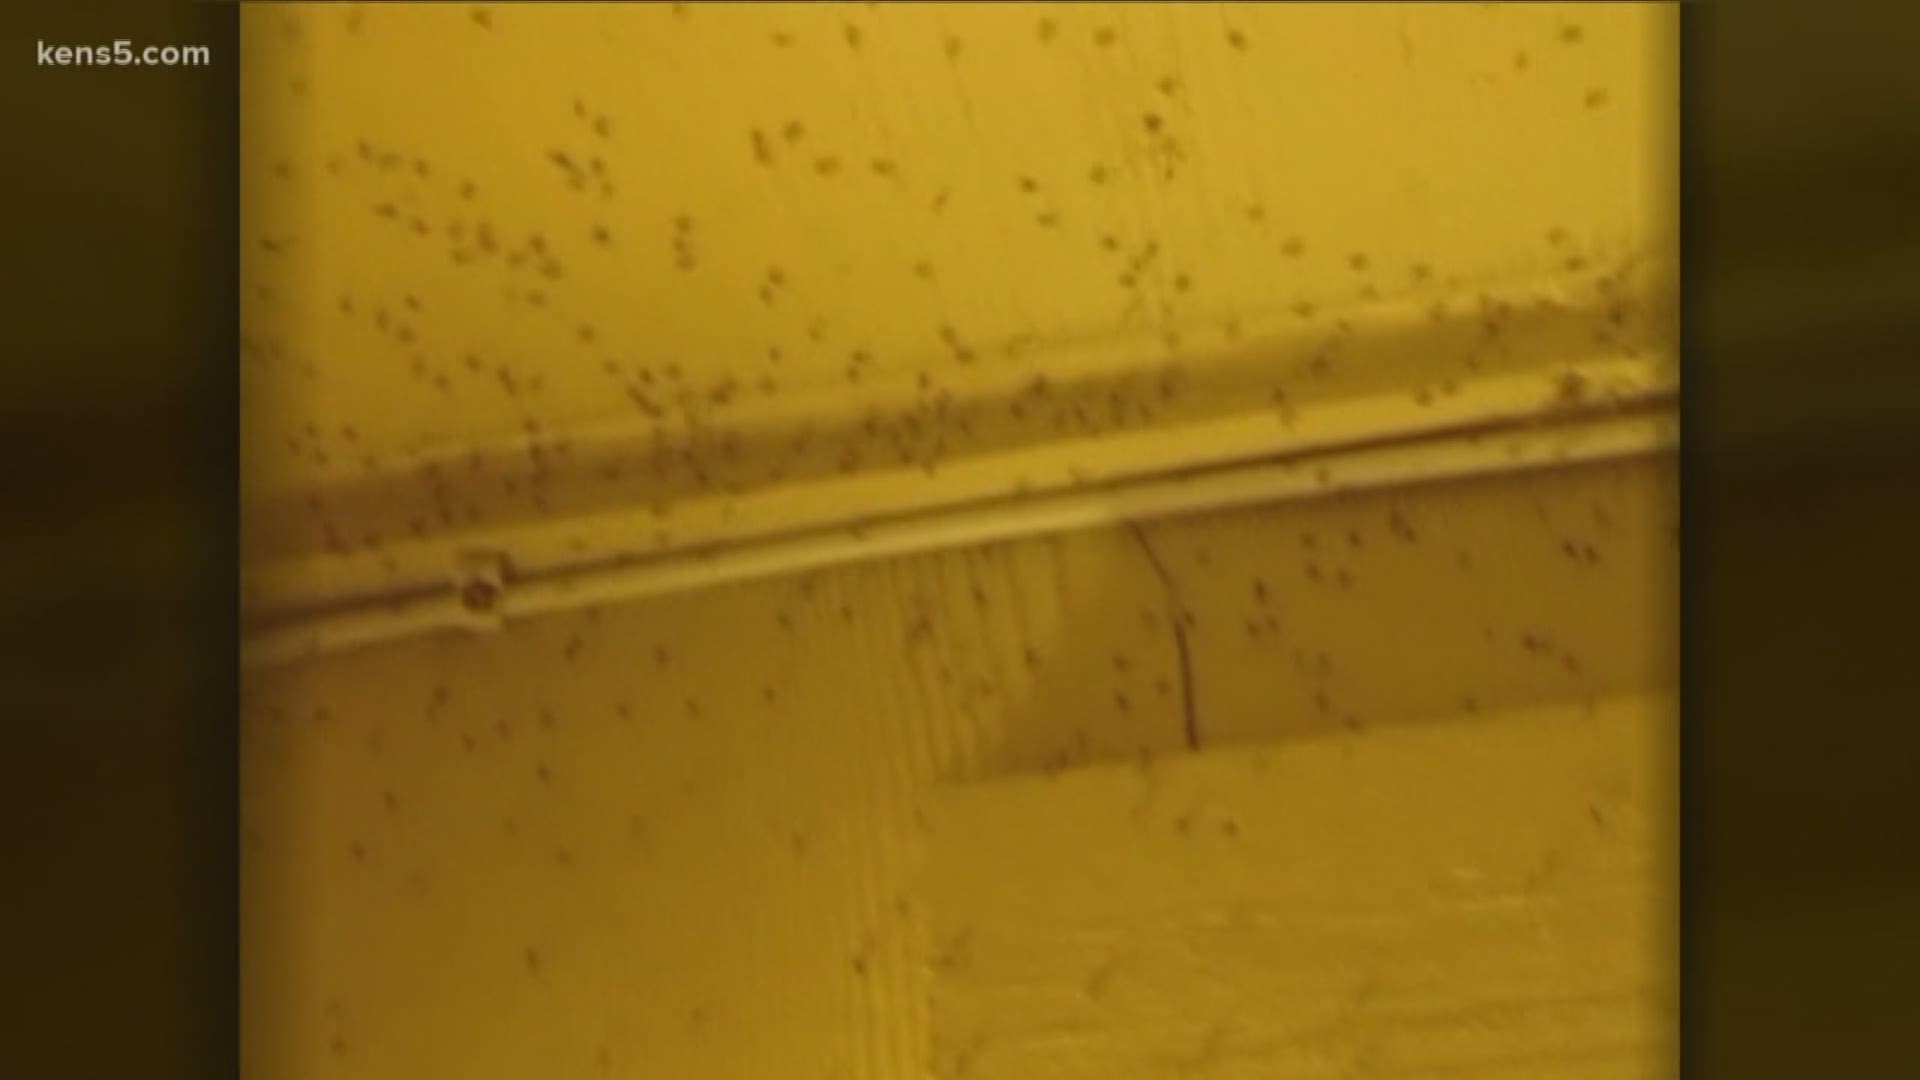 Kerrville residents say they're trapped inside their own homes. All due to thick swarms of bugs plaguing their neighborhood. Eyewitness News reporter Sharon Ko has more.